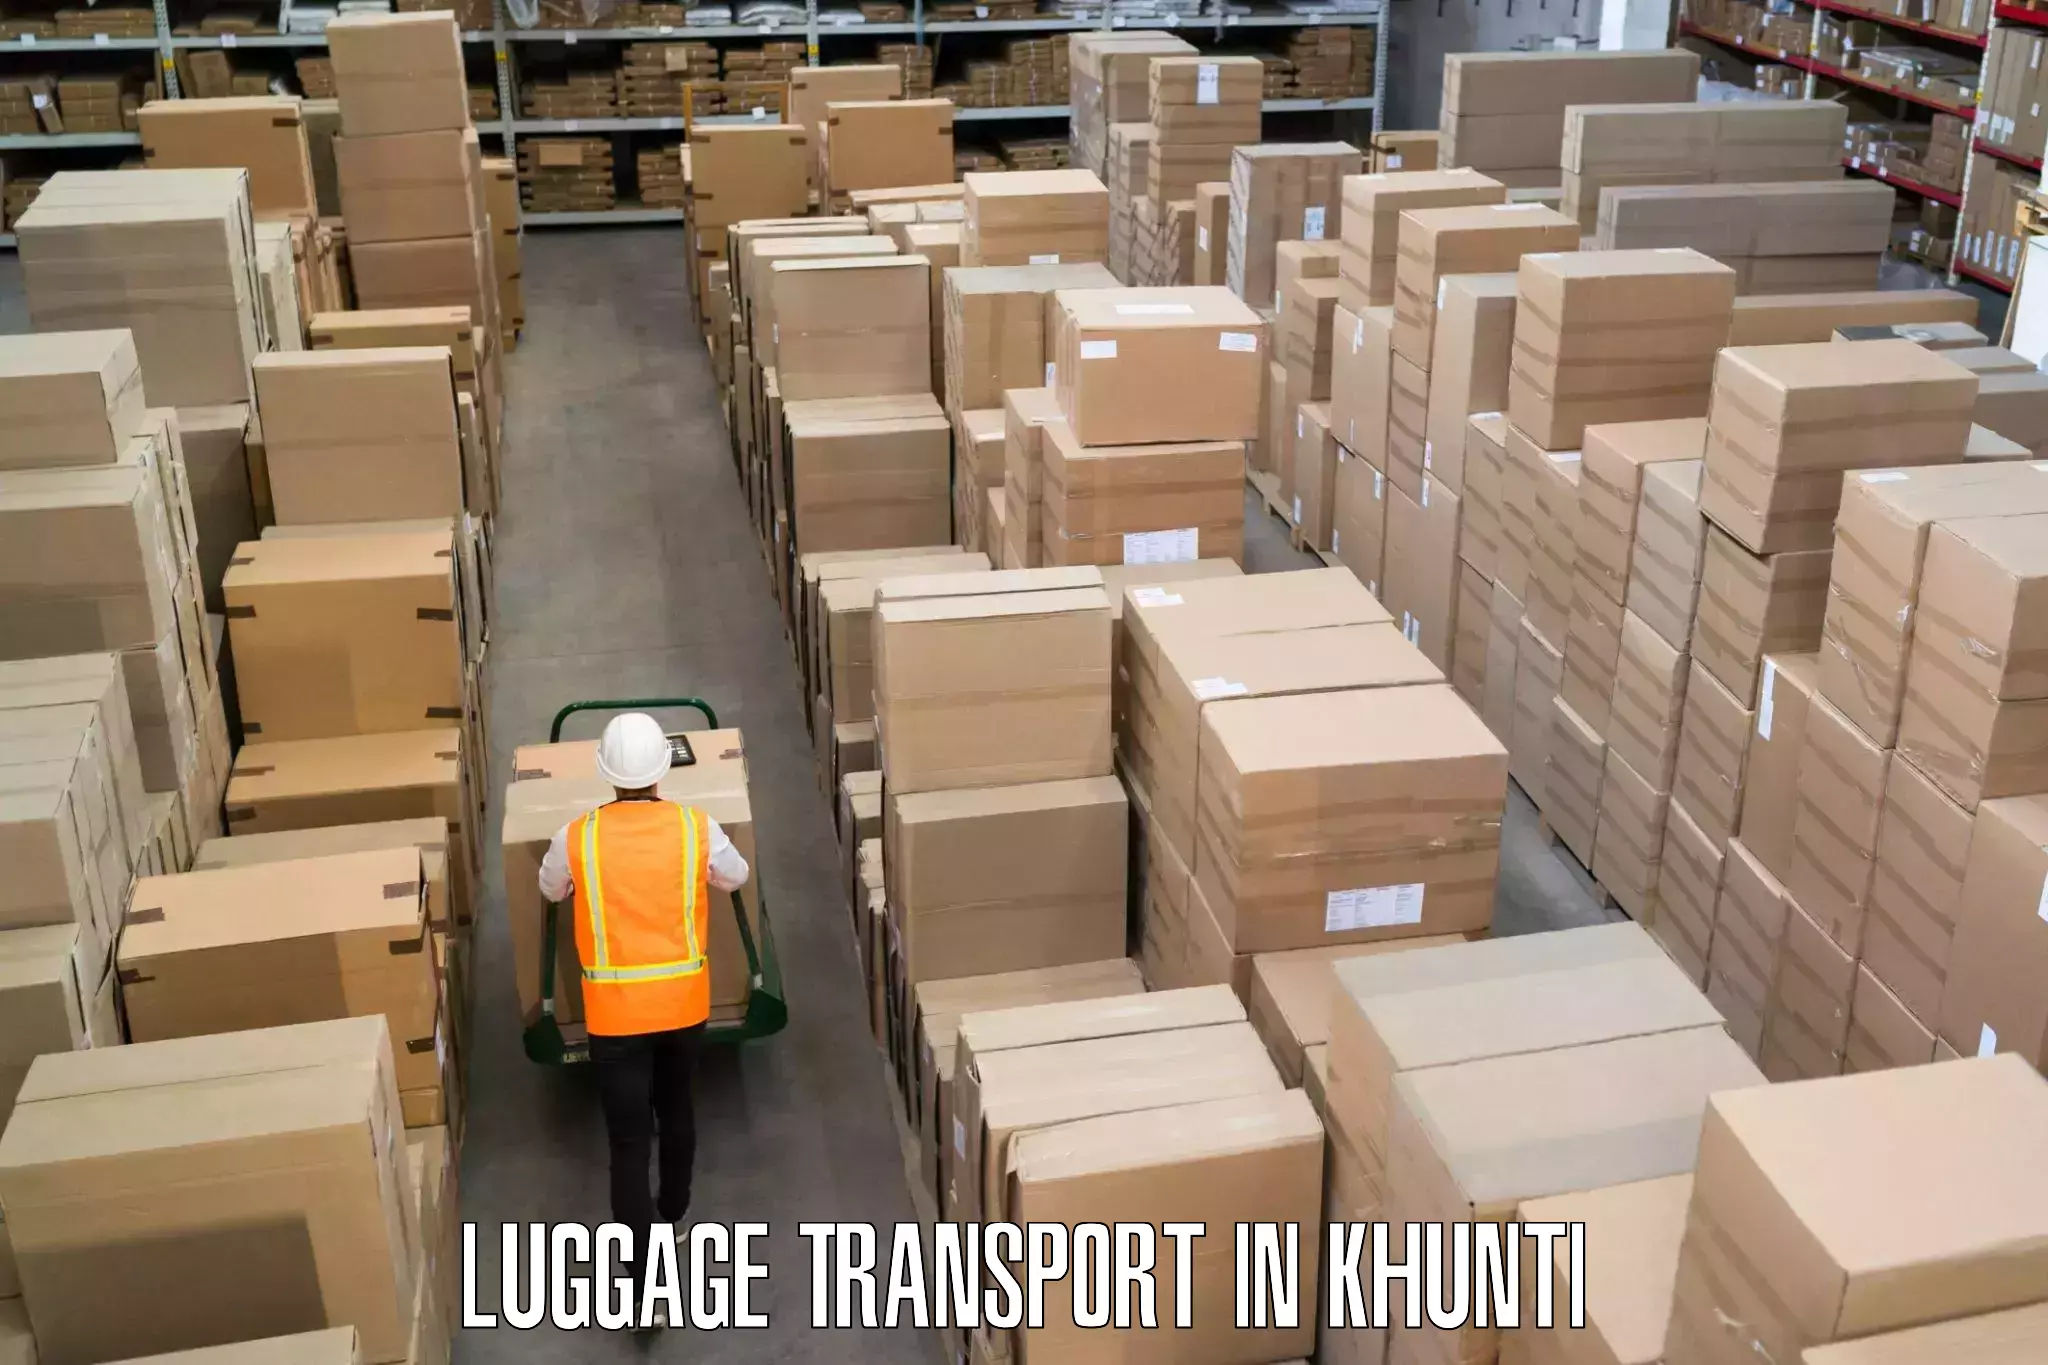 Luggage transport consultancy in Khunti